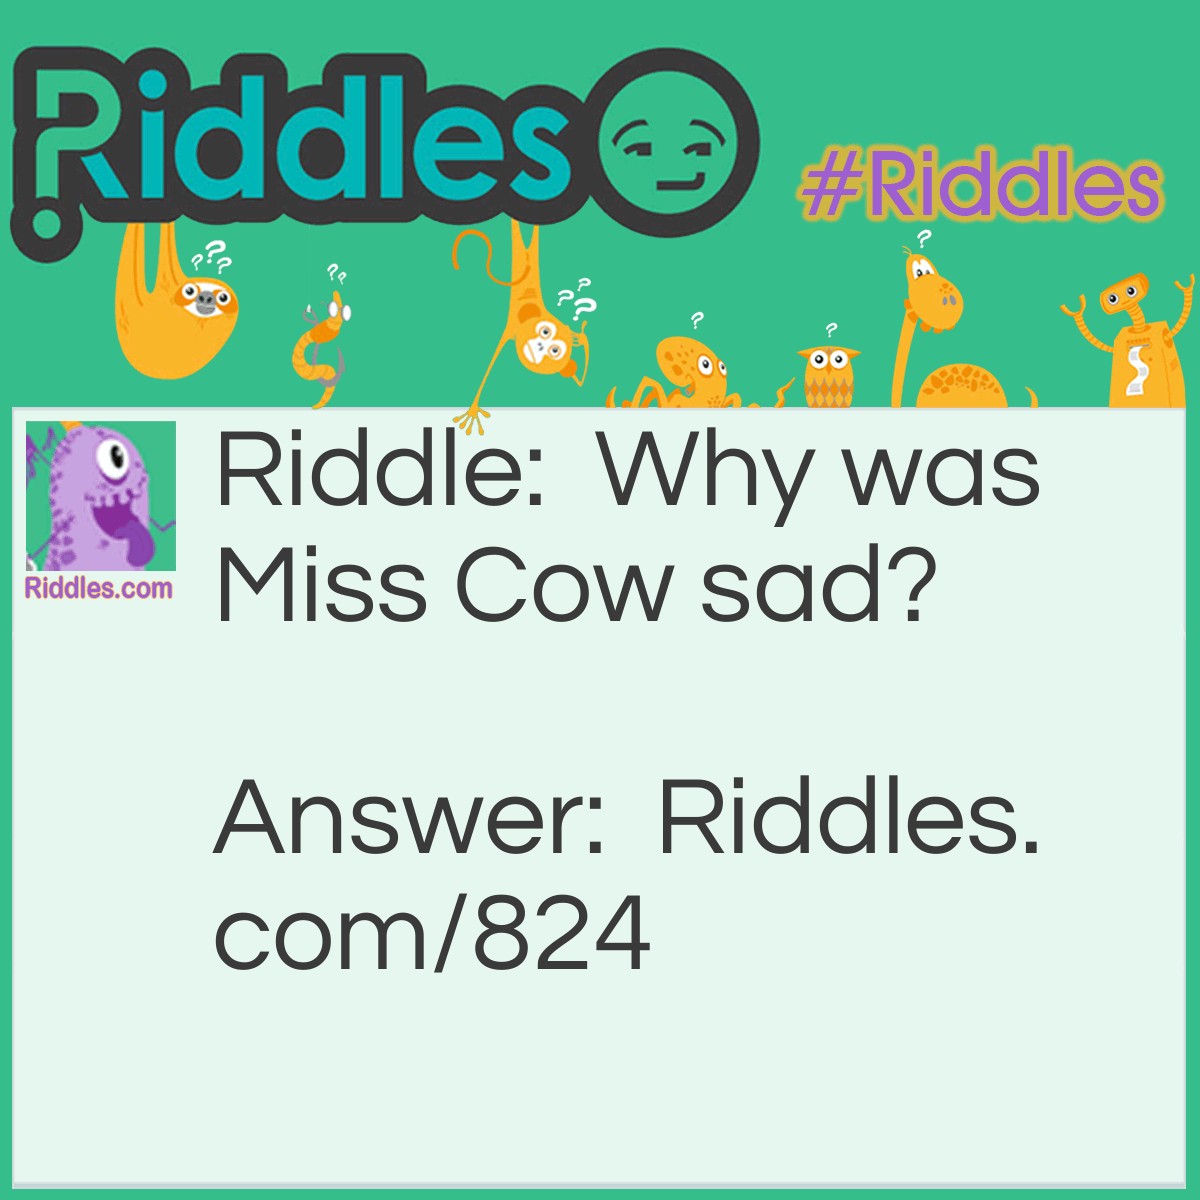 Riddle: Why was Miss Cow sad? Answer: Her boyfriend was in a bullfight!